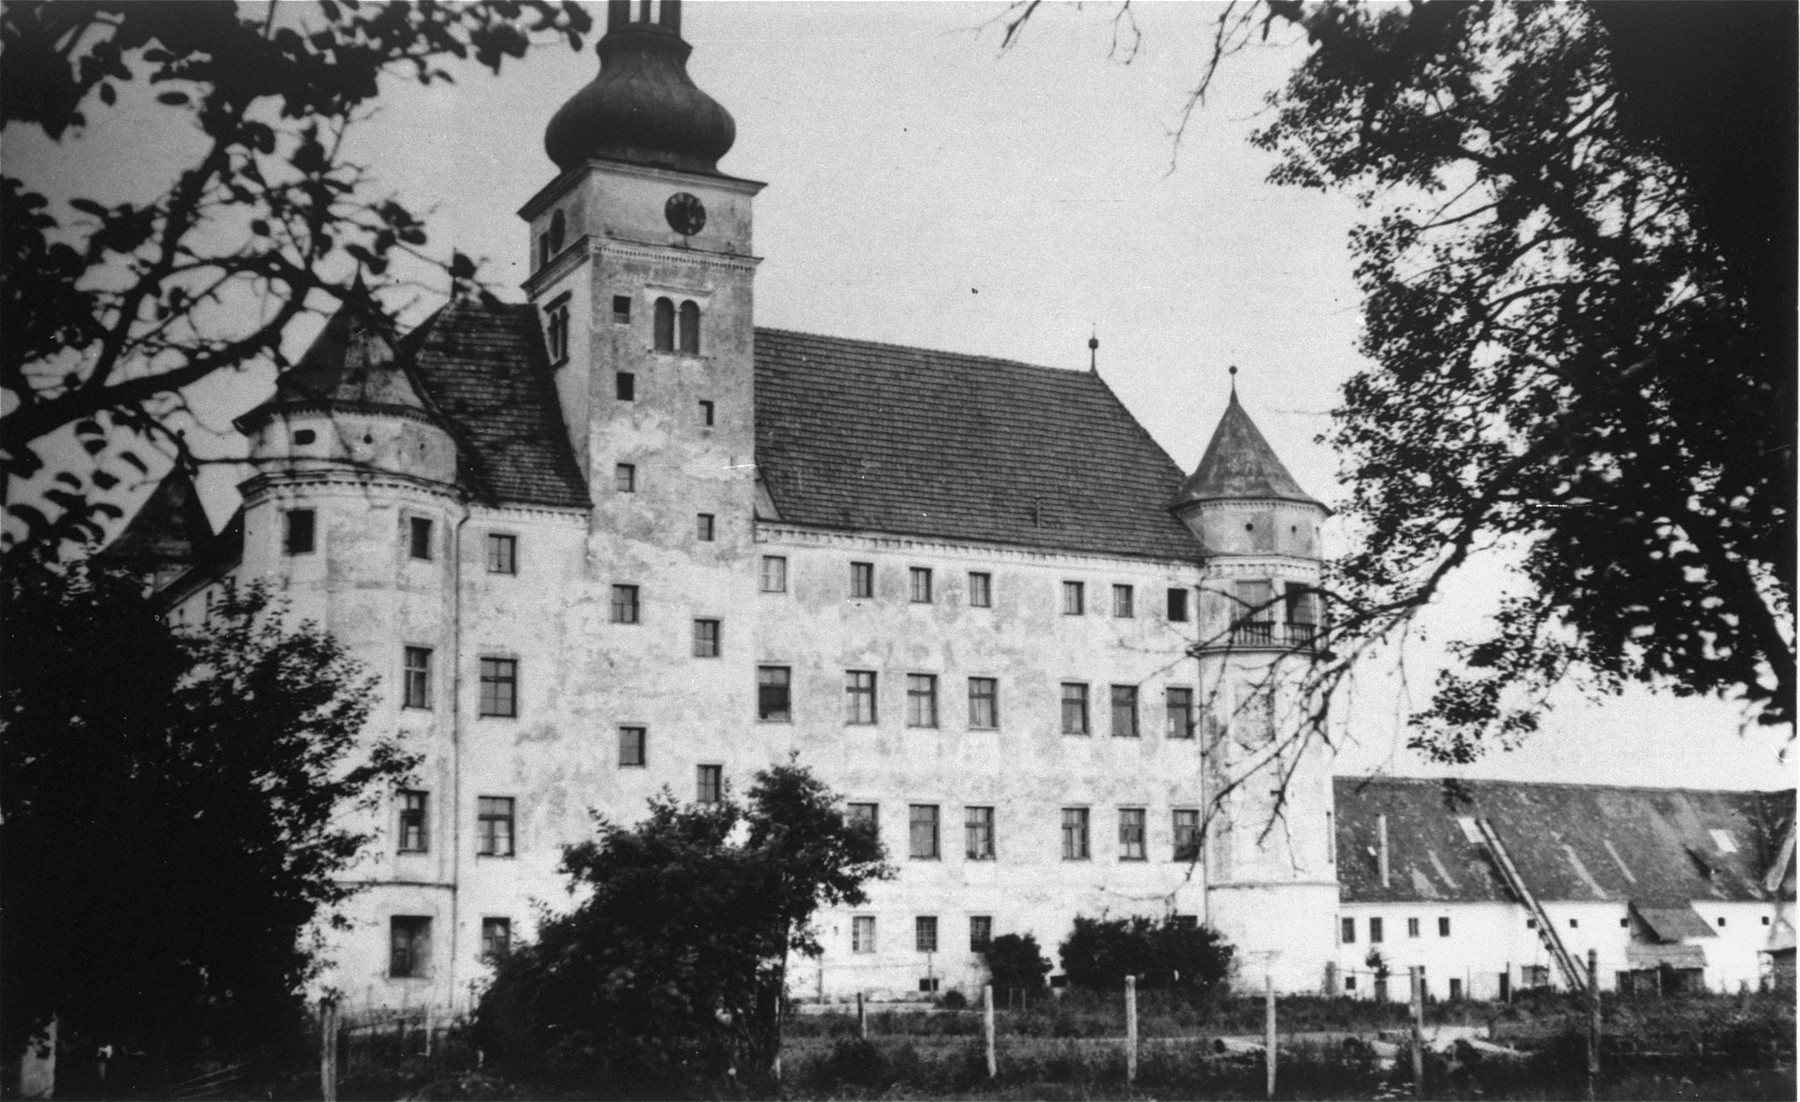 Hartheim Castle, site of a ‘T4’ euthanasia center from May 1940 though 1944, Alkoven, Austria